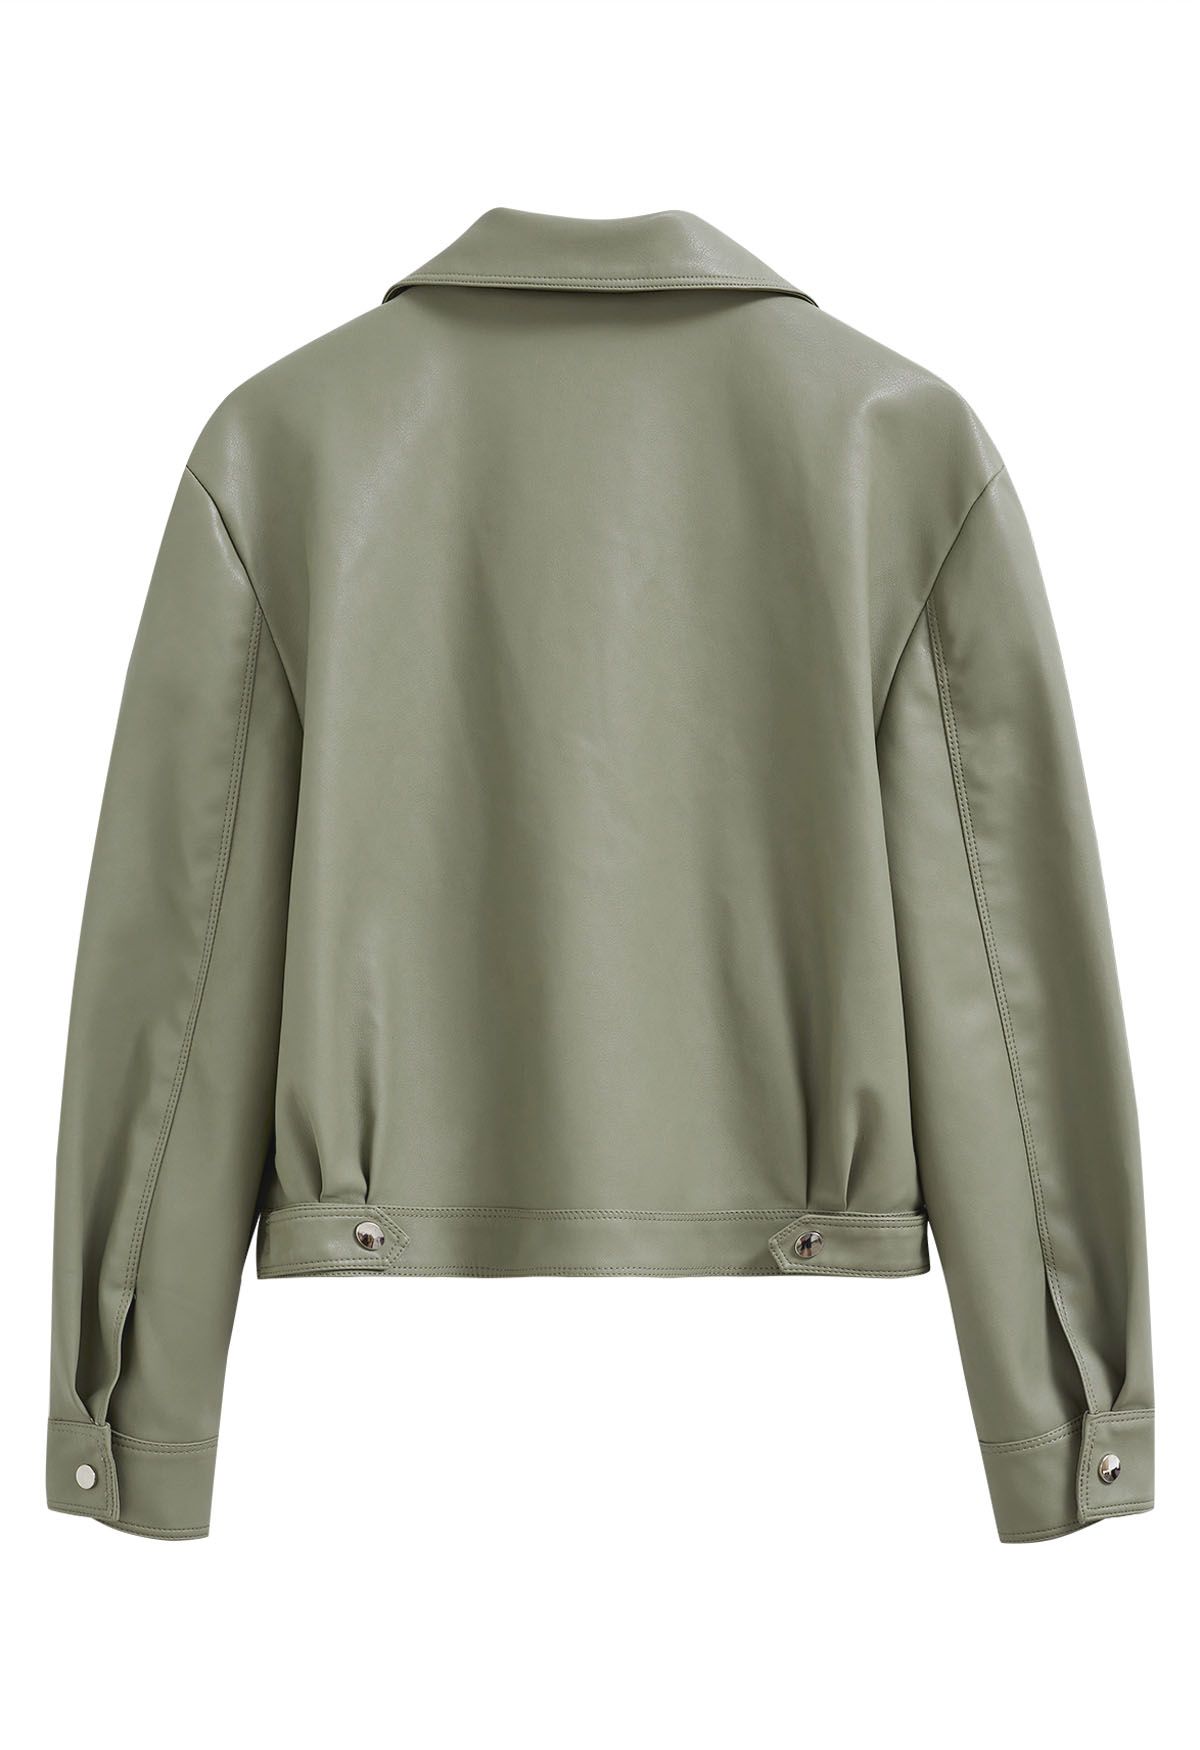 Diagonal Zip Up Faux Leather Jacket in Olive